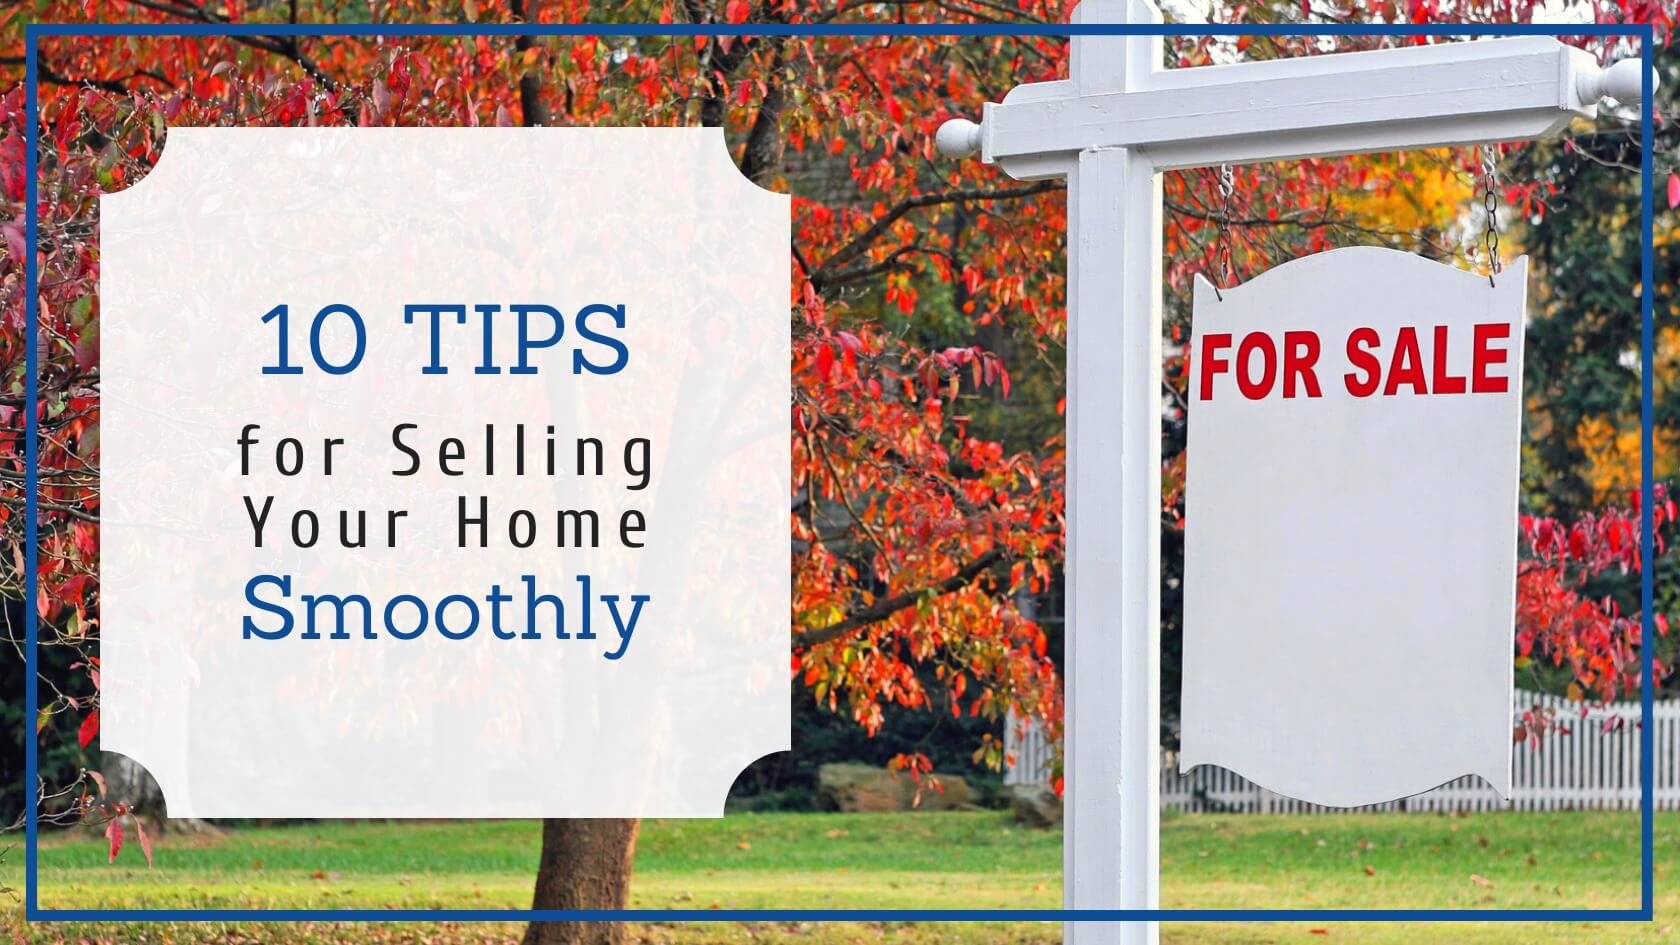 How to Sell Your Home Smoothly